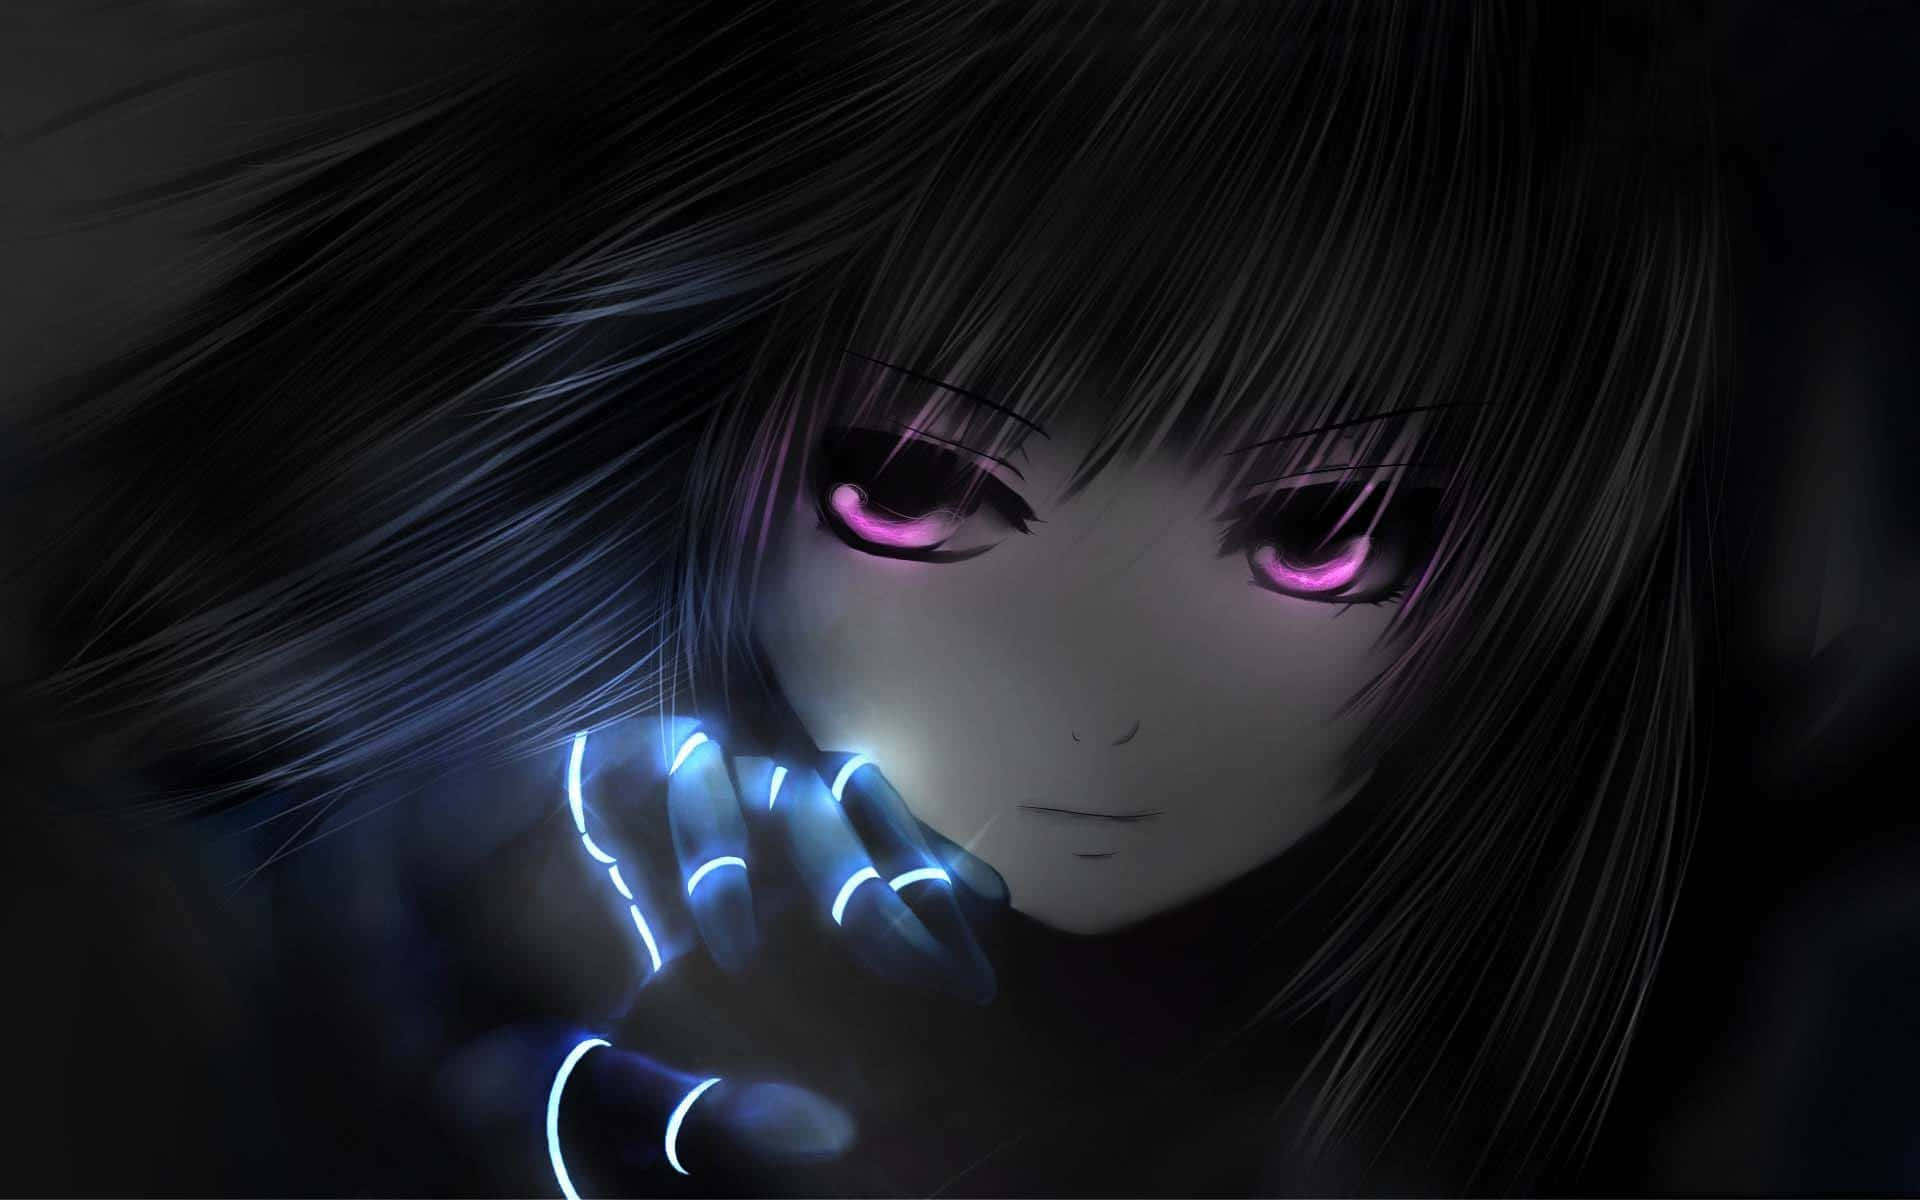 Download “Dark Anime Girl with a Mysterious Allure” Wallpaper